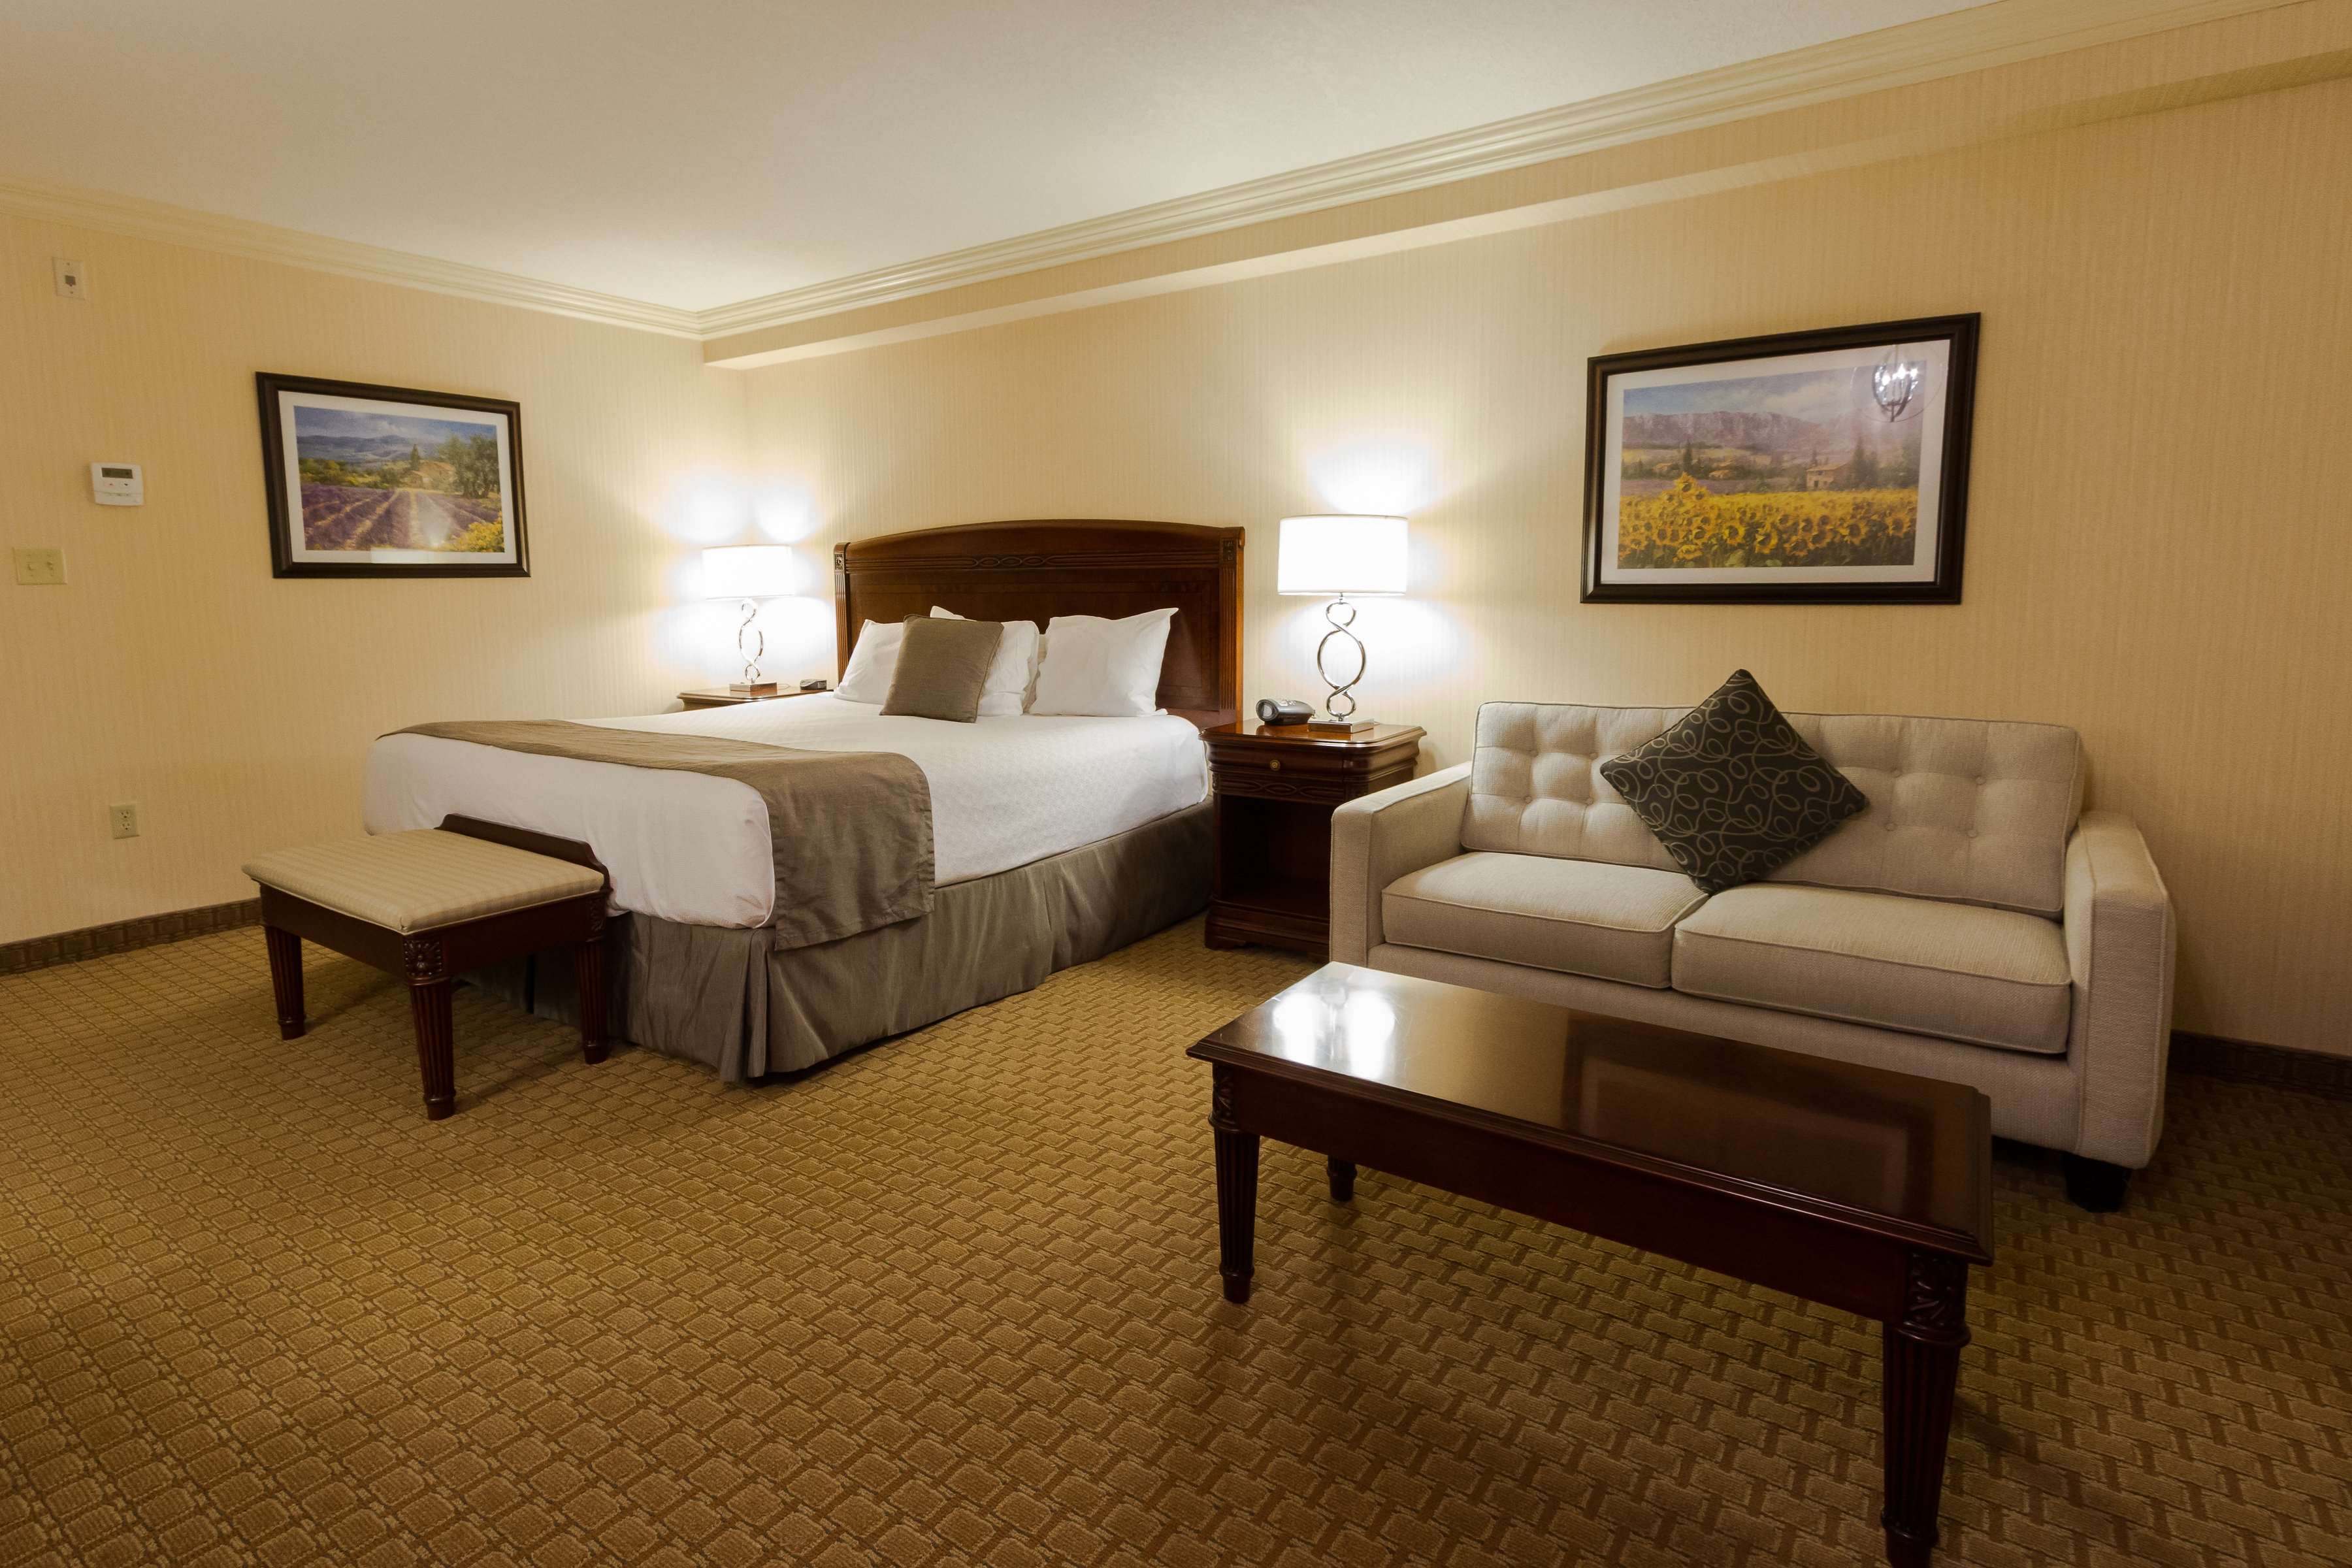 King Bed Guest Room Best Western Plus The Arden Park Hotel Stratford (519)275-2936